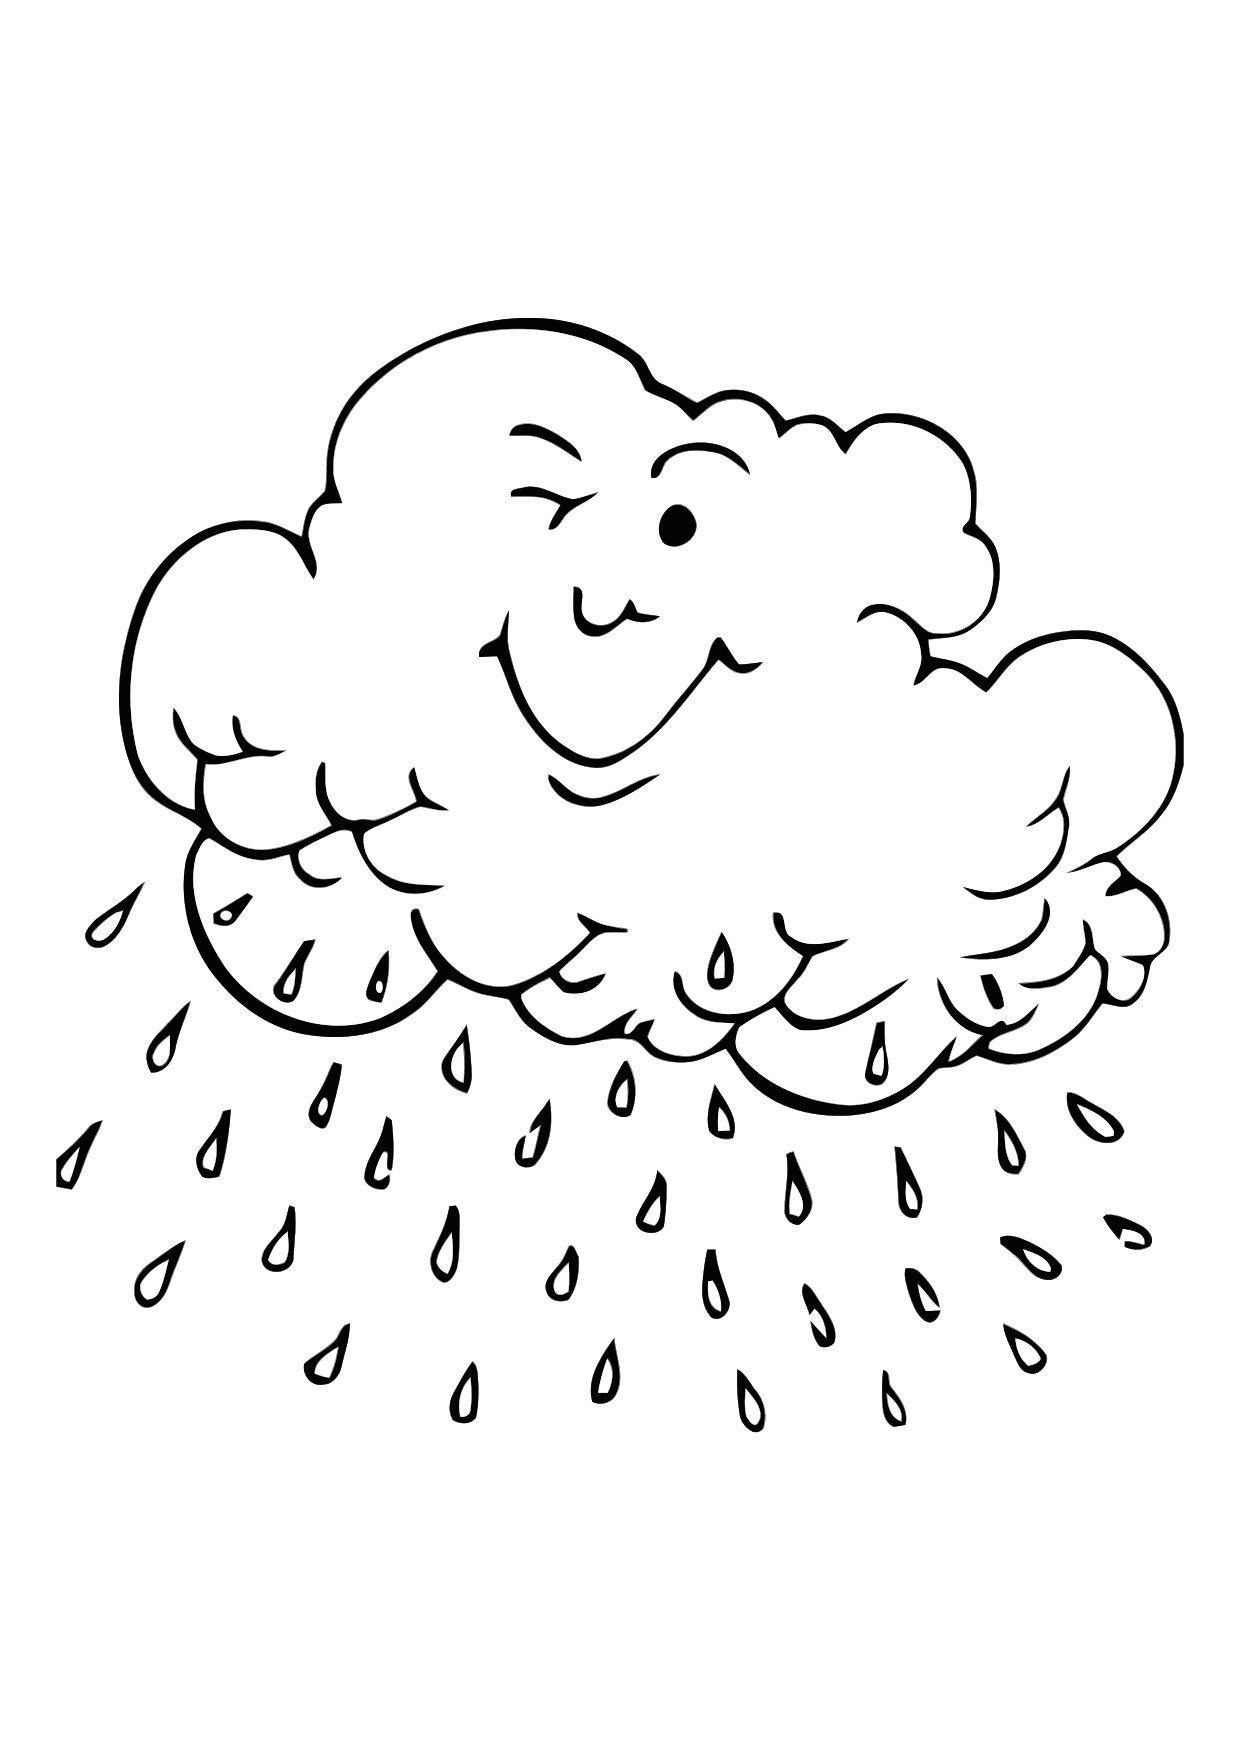 types of clouds coloring pages